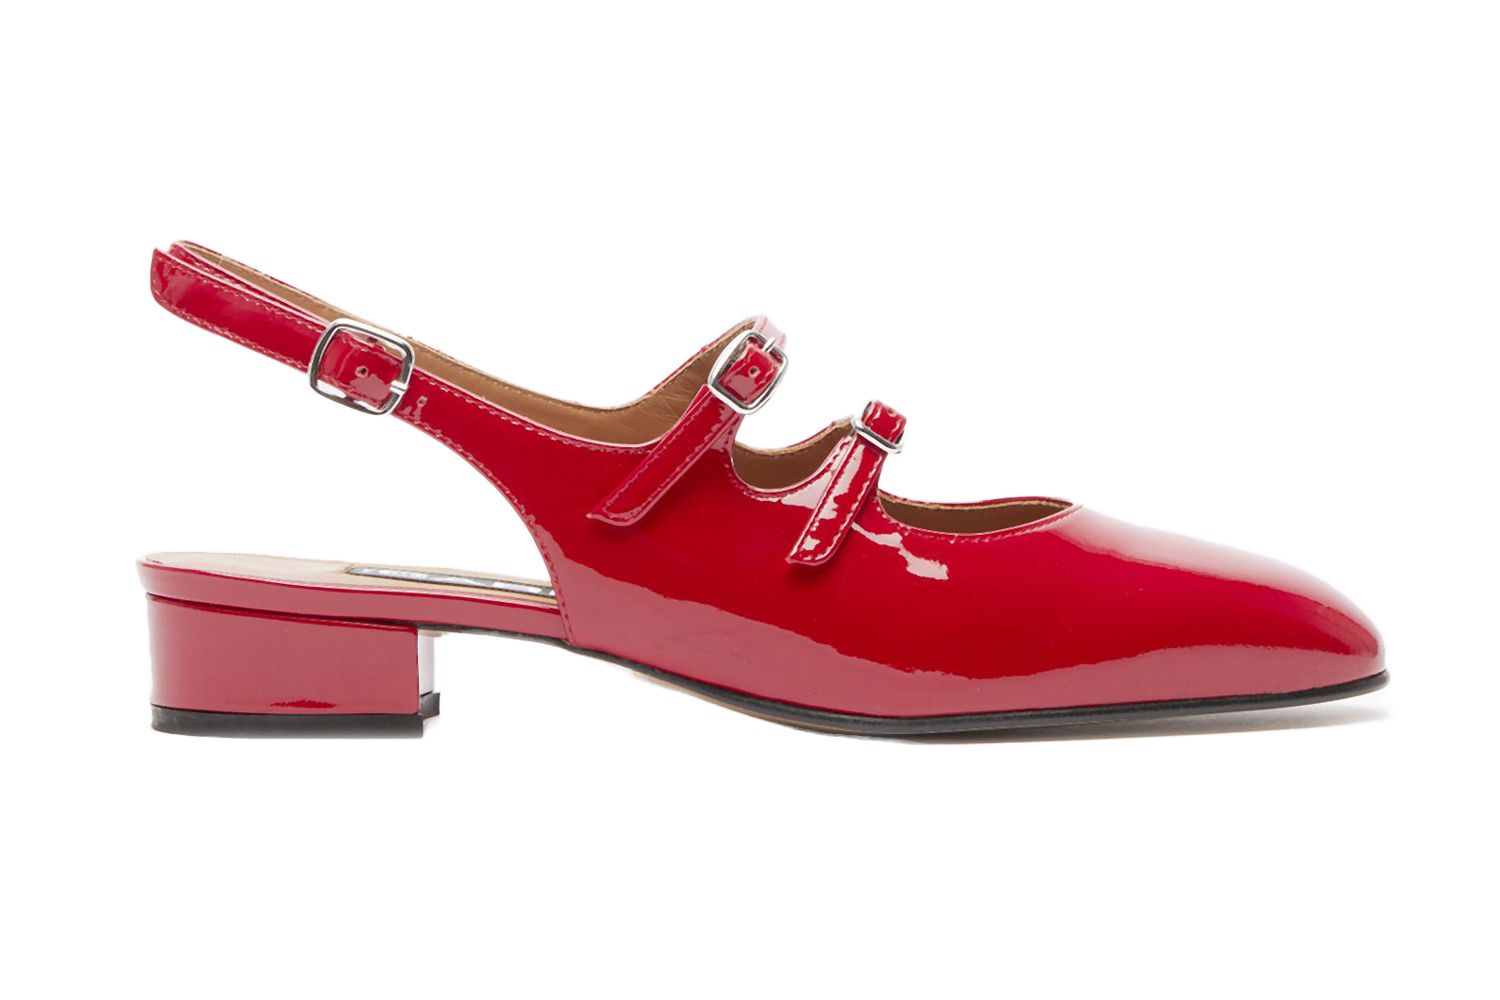 Carel Peche Red Patent Leather Mary Janes